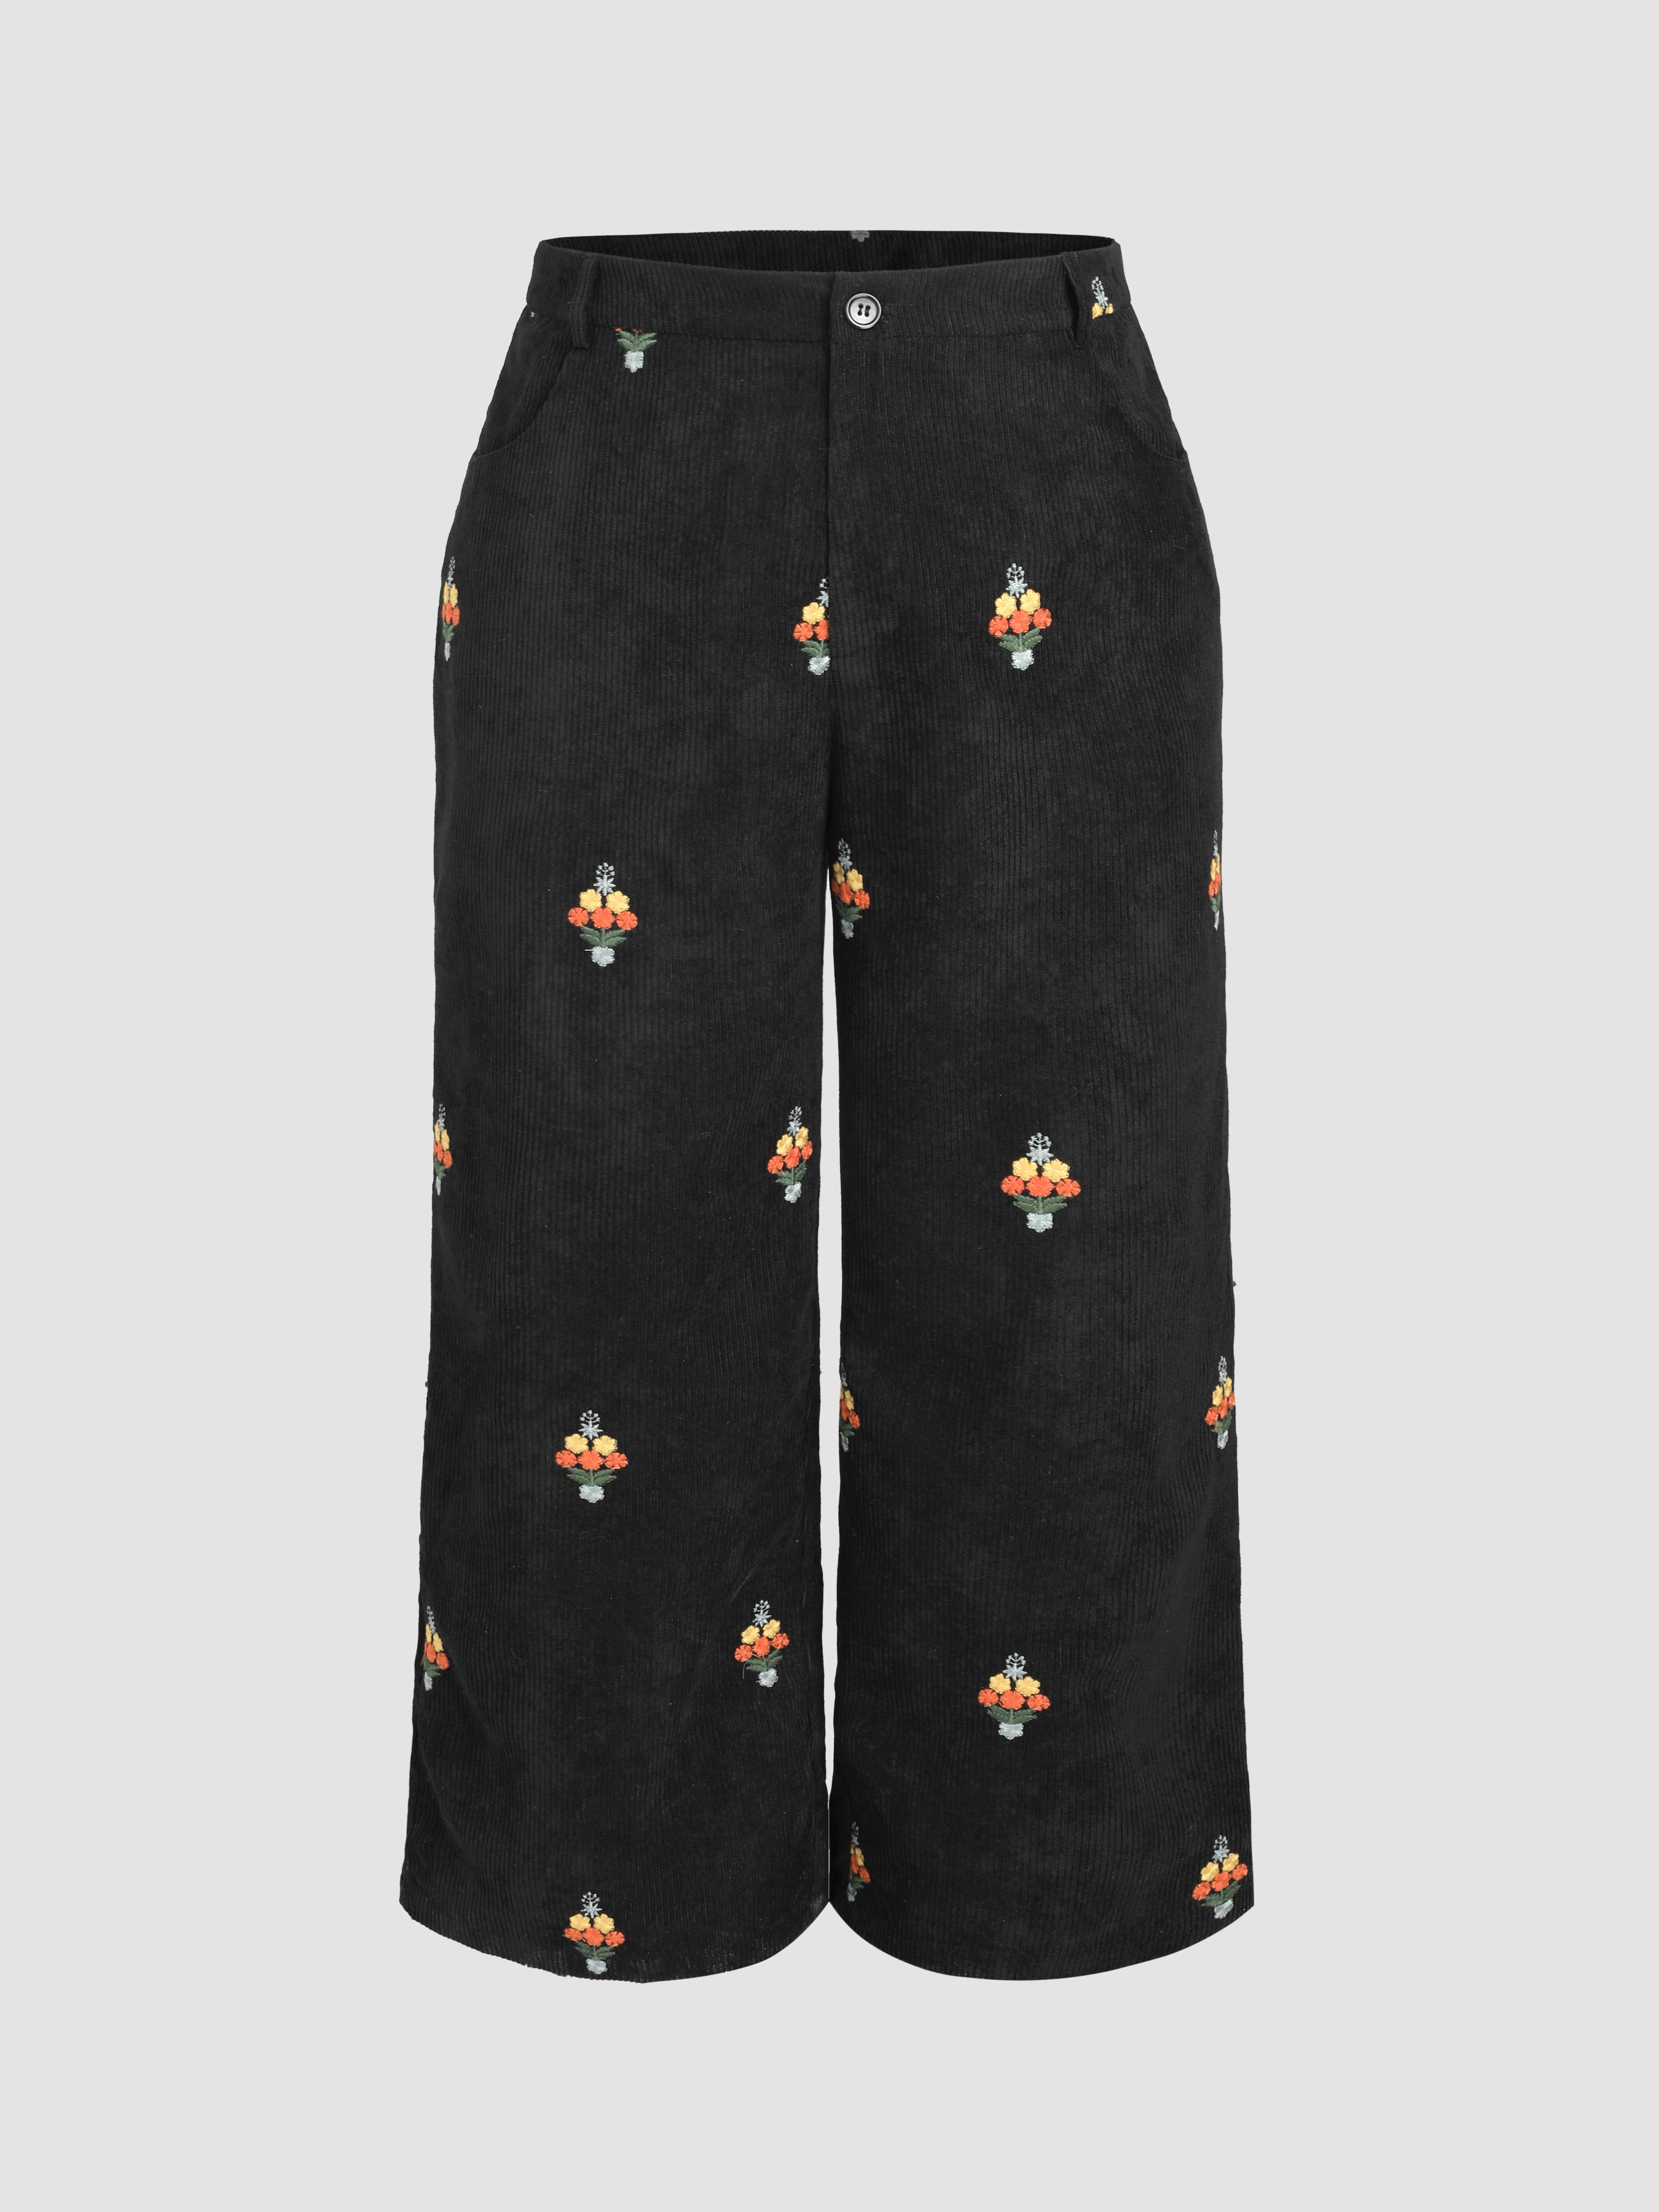 Buy DOROTHY PERKINS Women Black & Pink Floral Print Trousers - Trousers for  Women 6398726 | Myntra